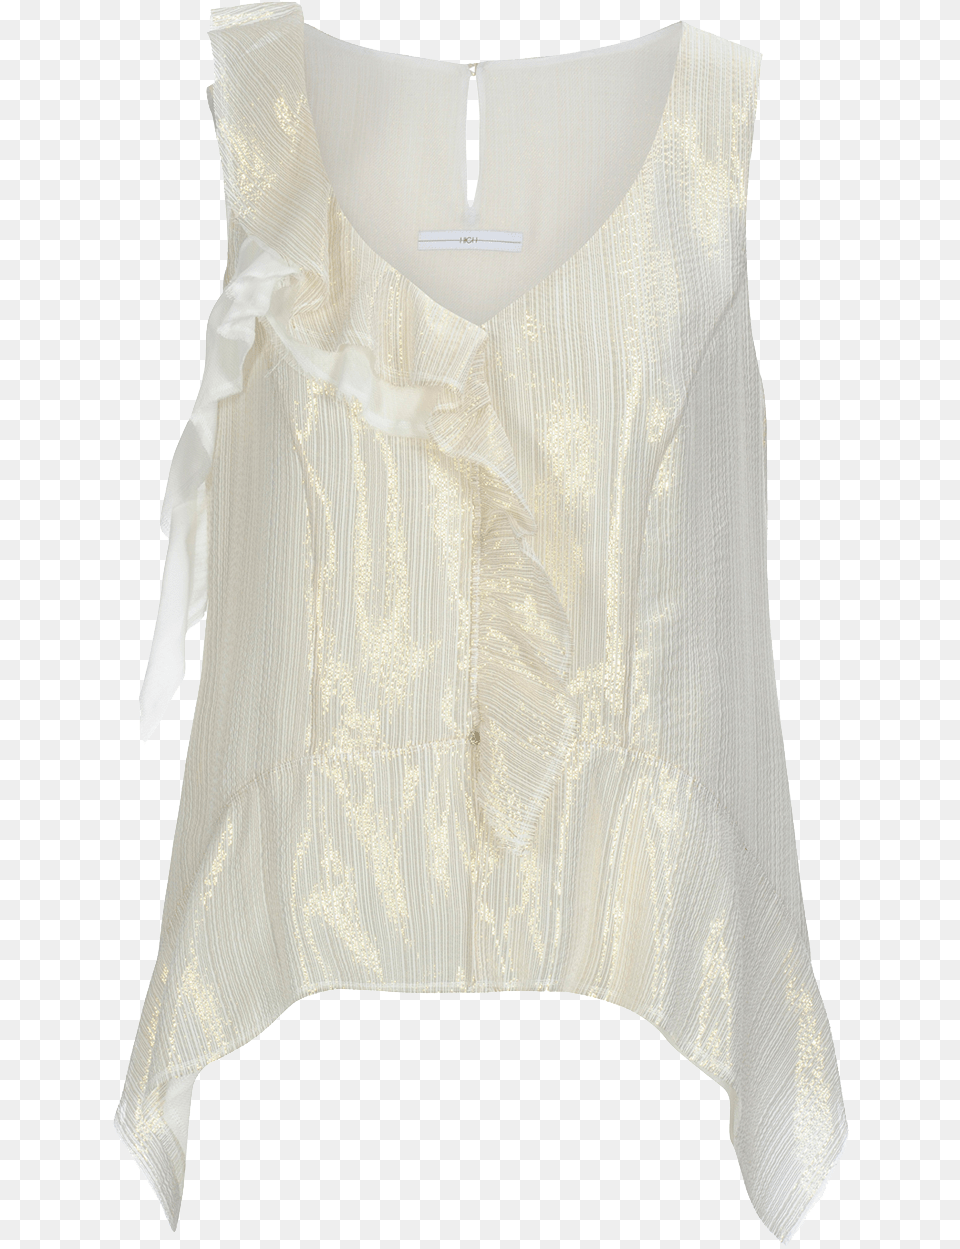 Gleam Cream And Gold Metallic Sleeveless Top Blouse, Clothing, Shirt Png